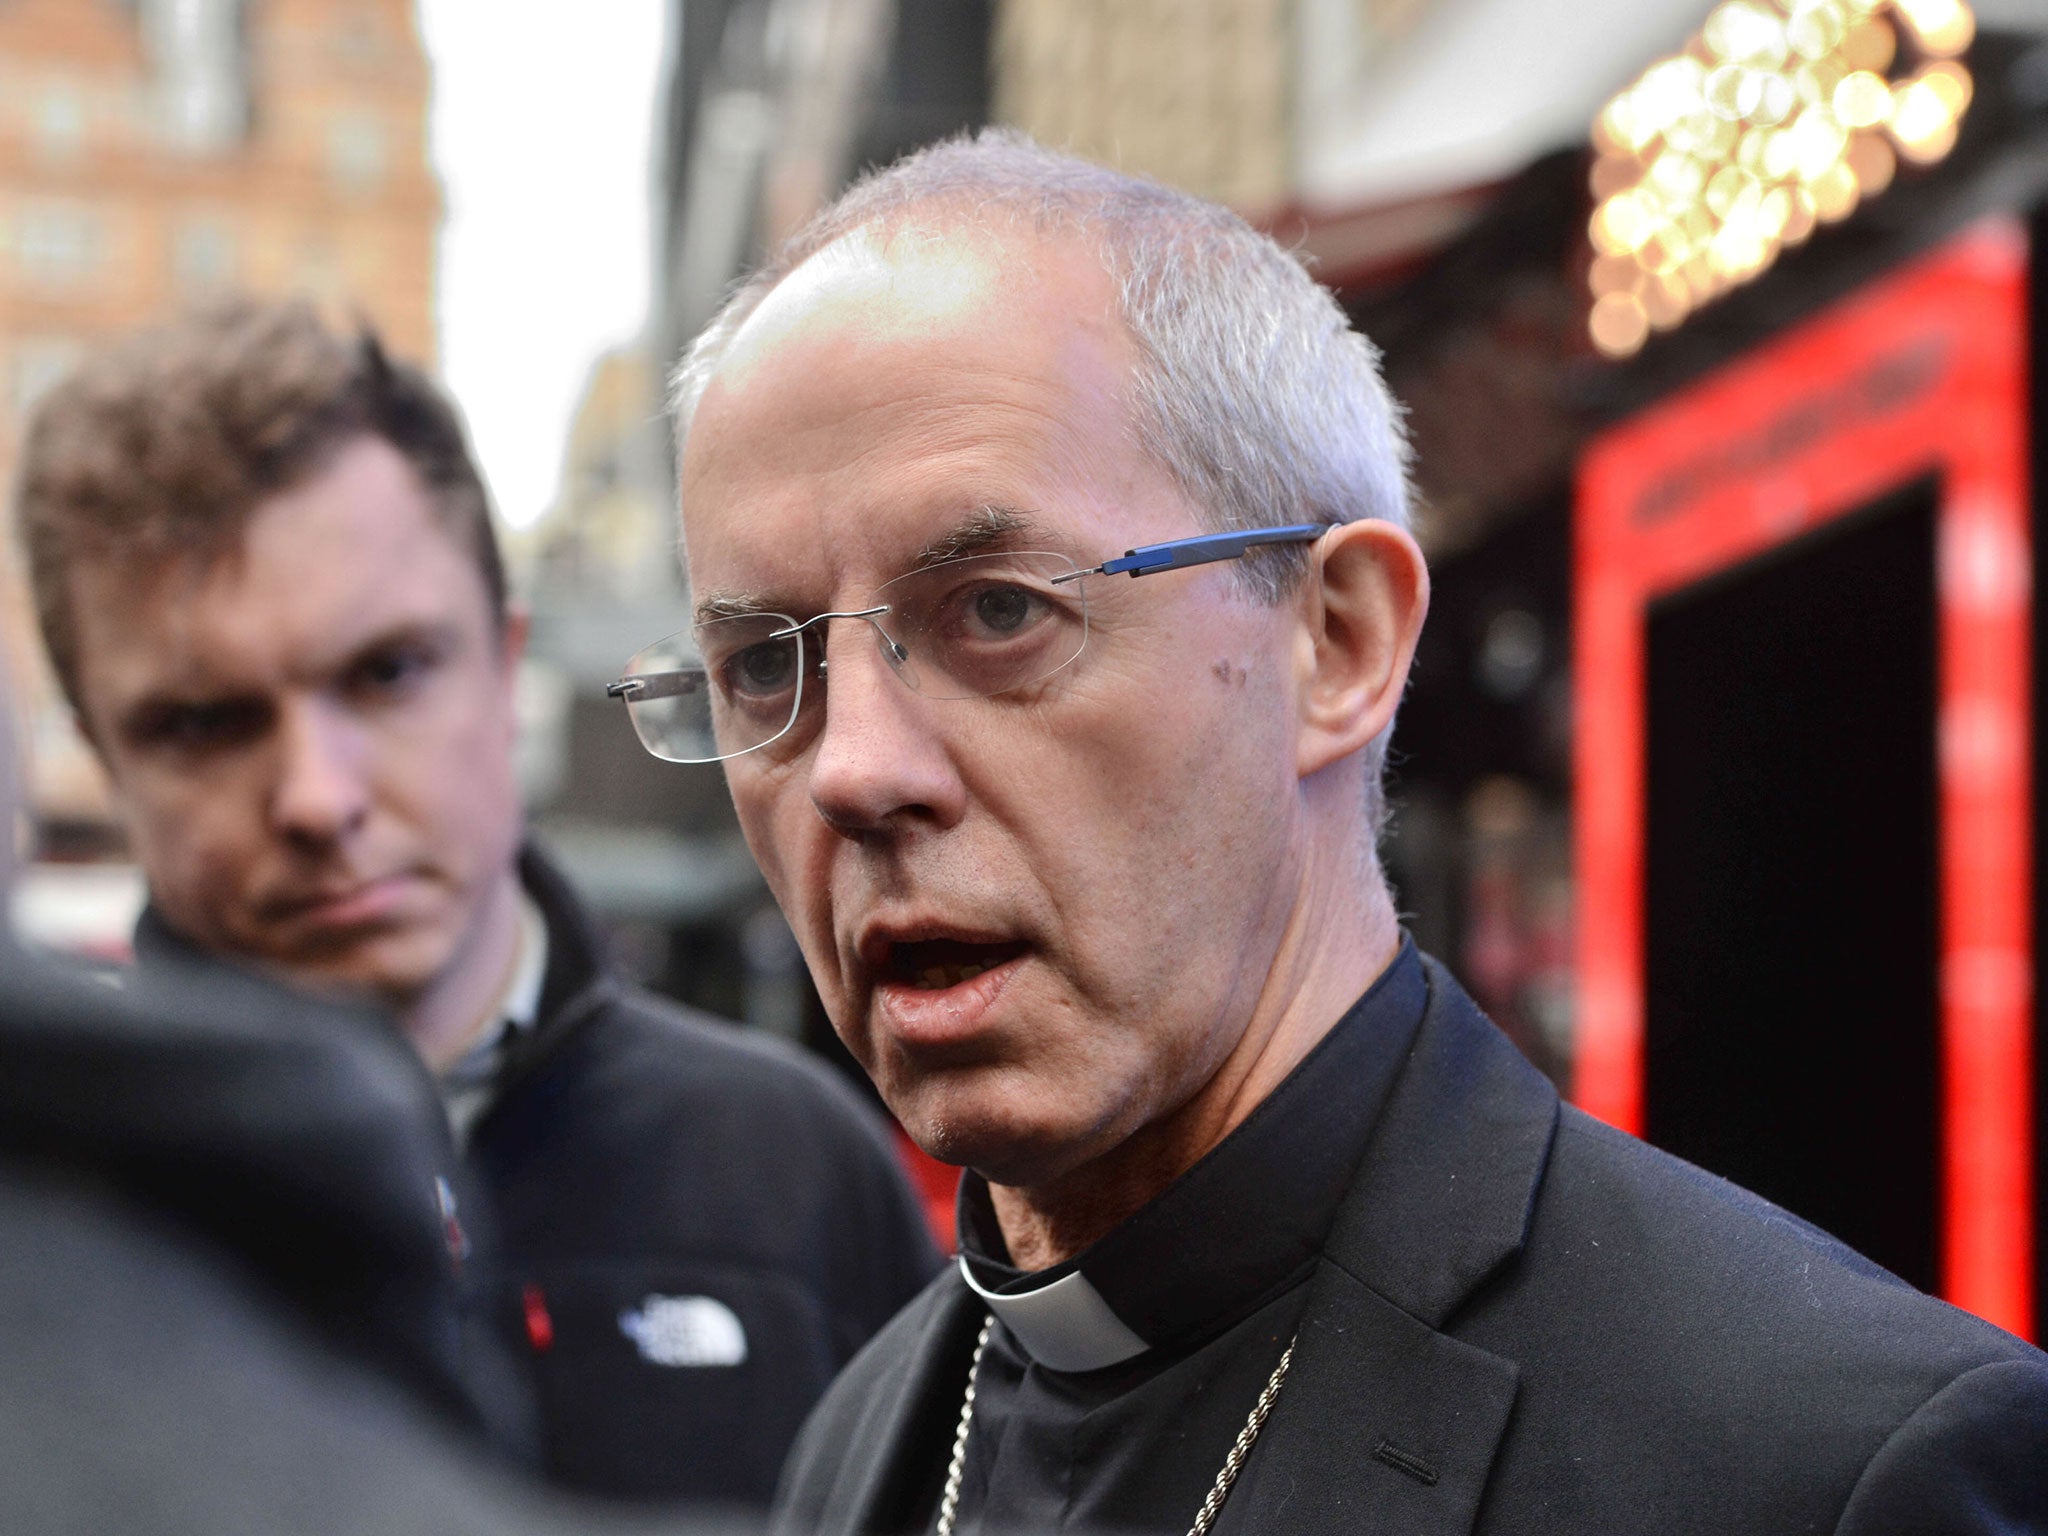 Justin Welby said he would be “very glad” to meet Donald Trump